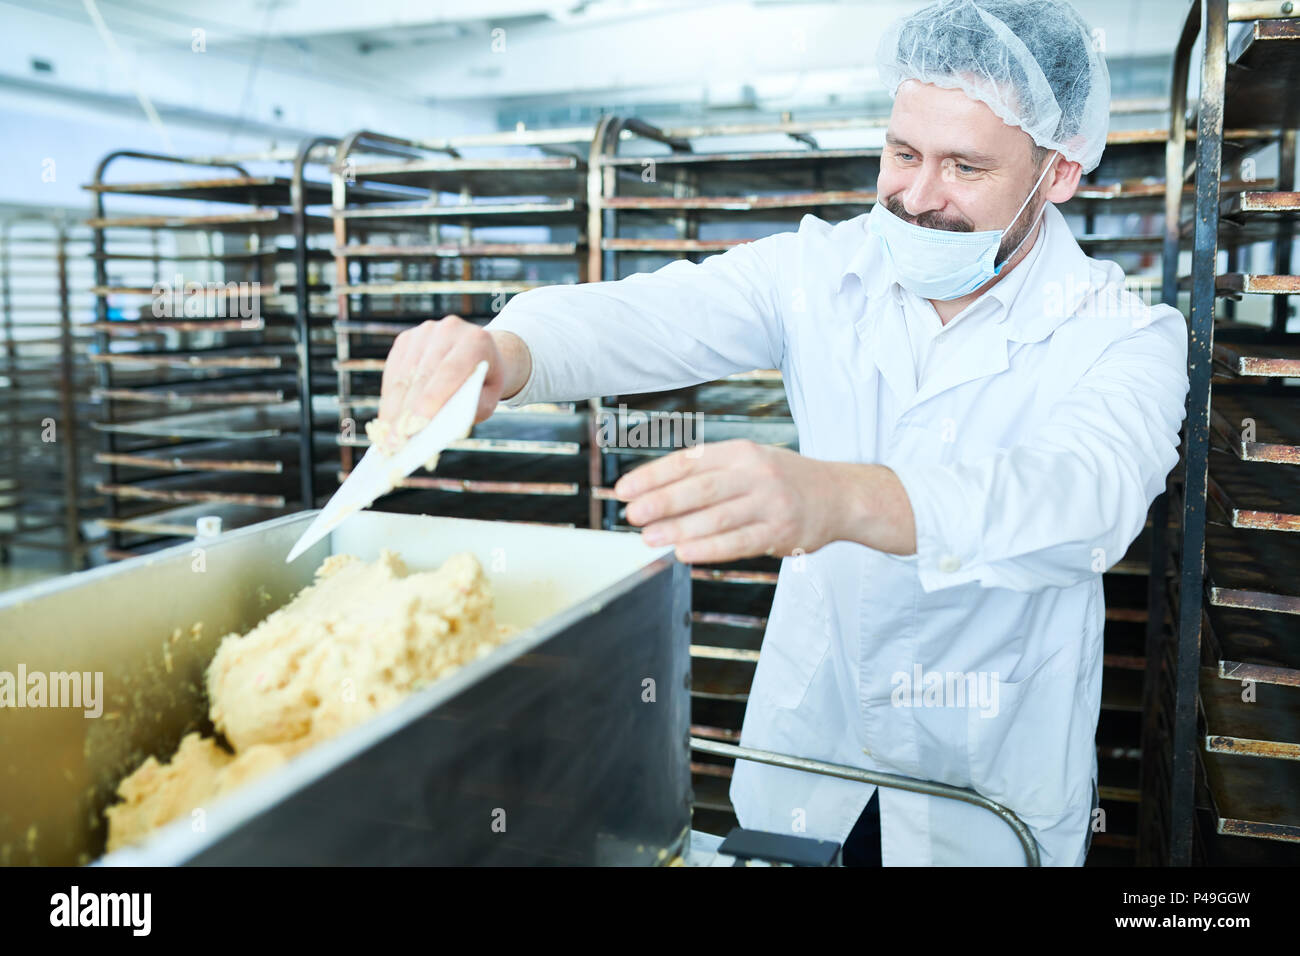 Confectioner mixing dough in factory Stock Photo